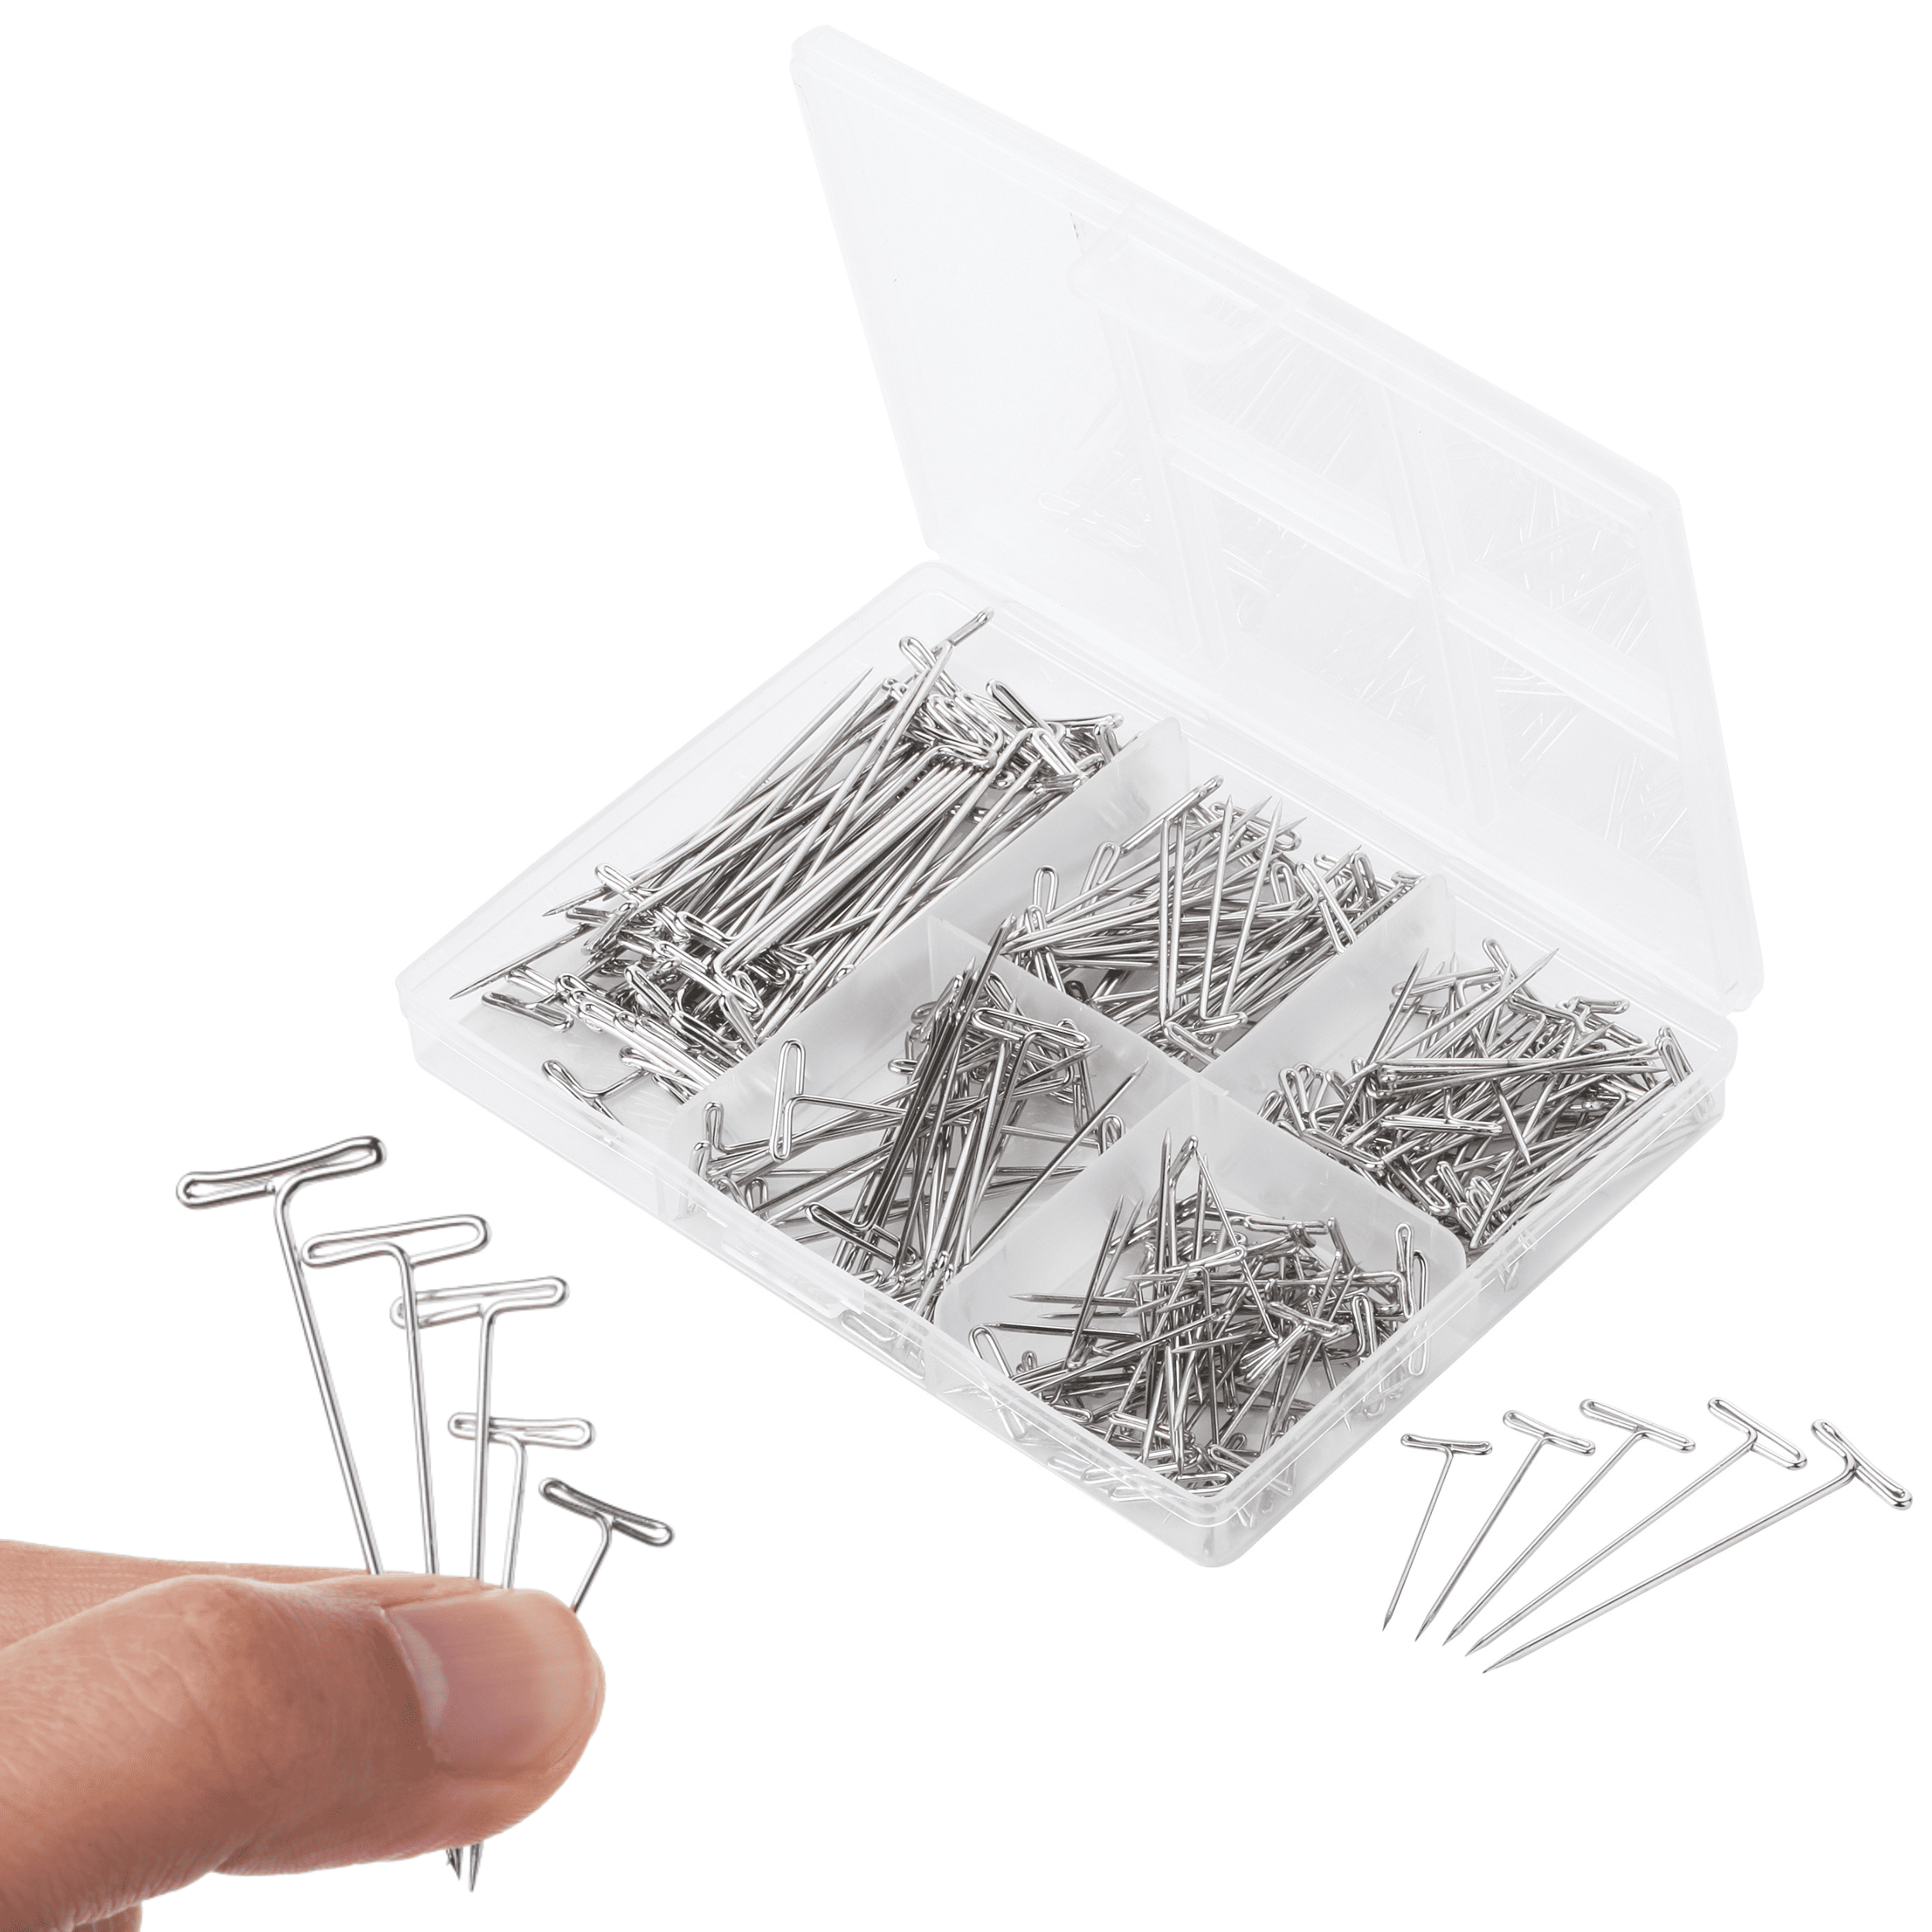  EXCEART 300 Pcs Wig T-pin Sewing t Pin Straight Pin